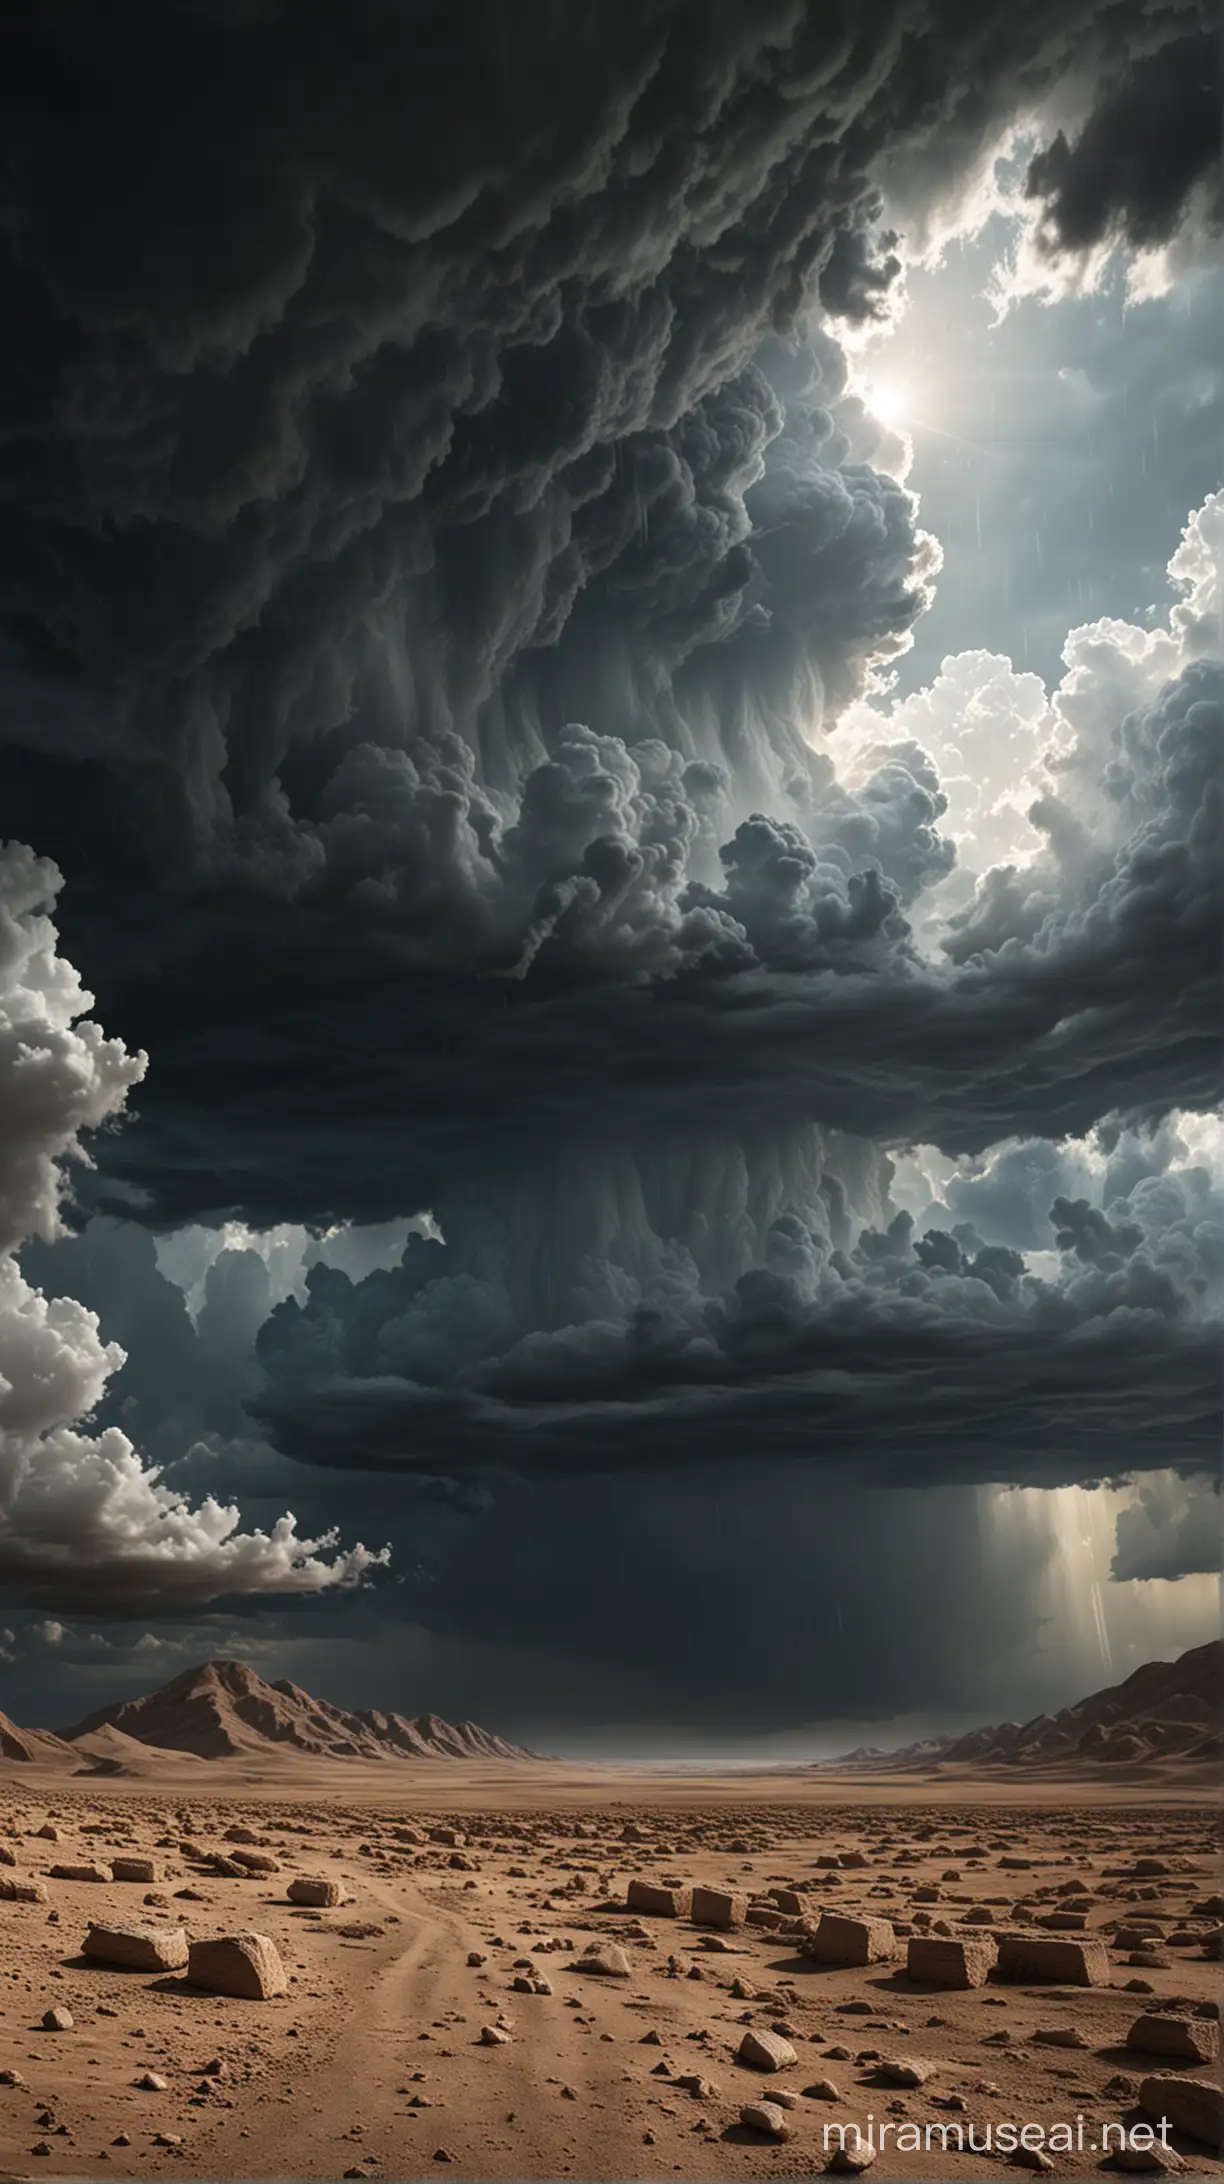 A stormy sky looming over the horizon, symbolizing the brewing conflict between Persia and Egyp. hyper realistic